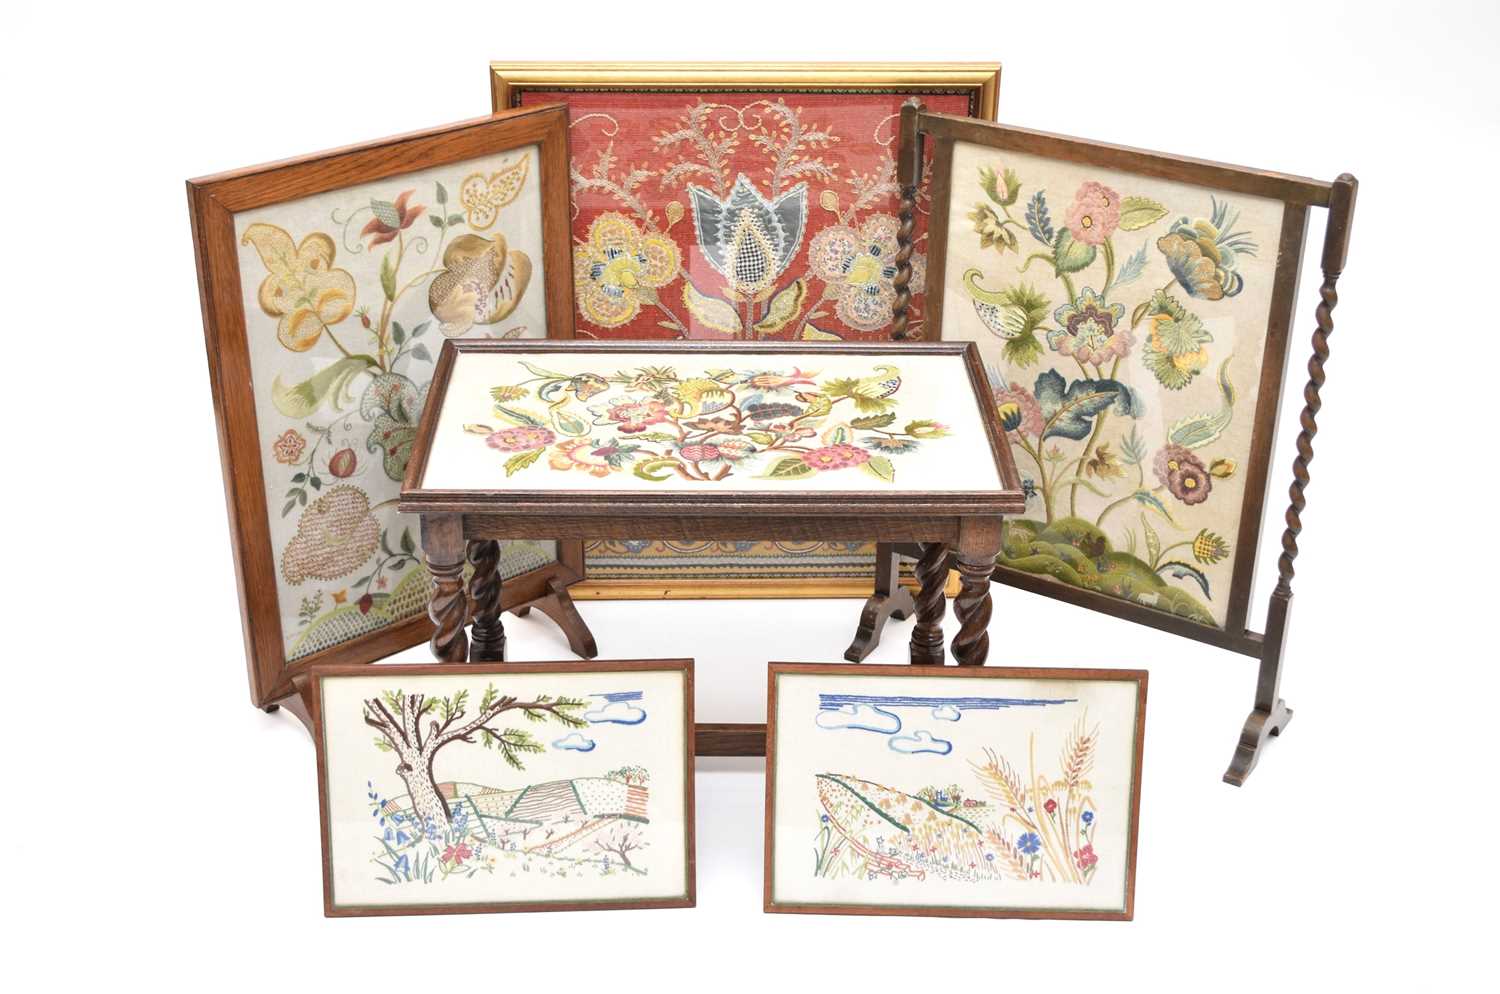 A collection of various embroidered textiles including two fire screens